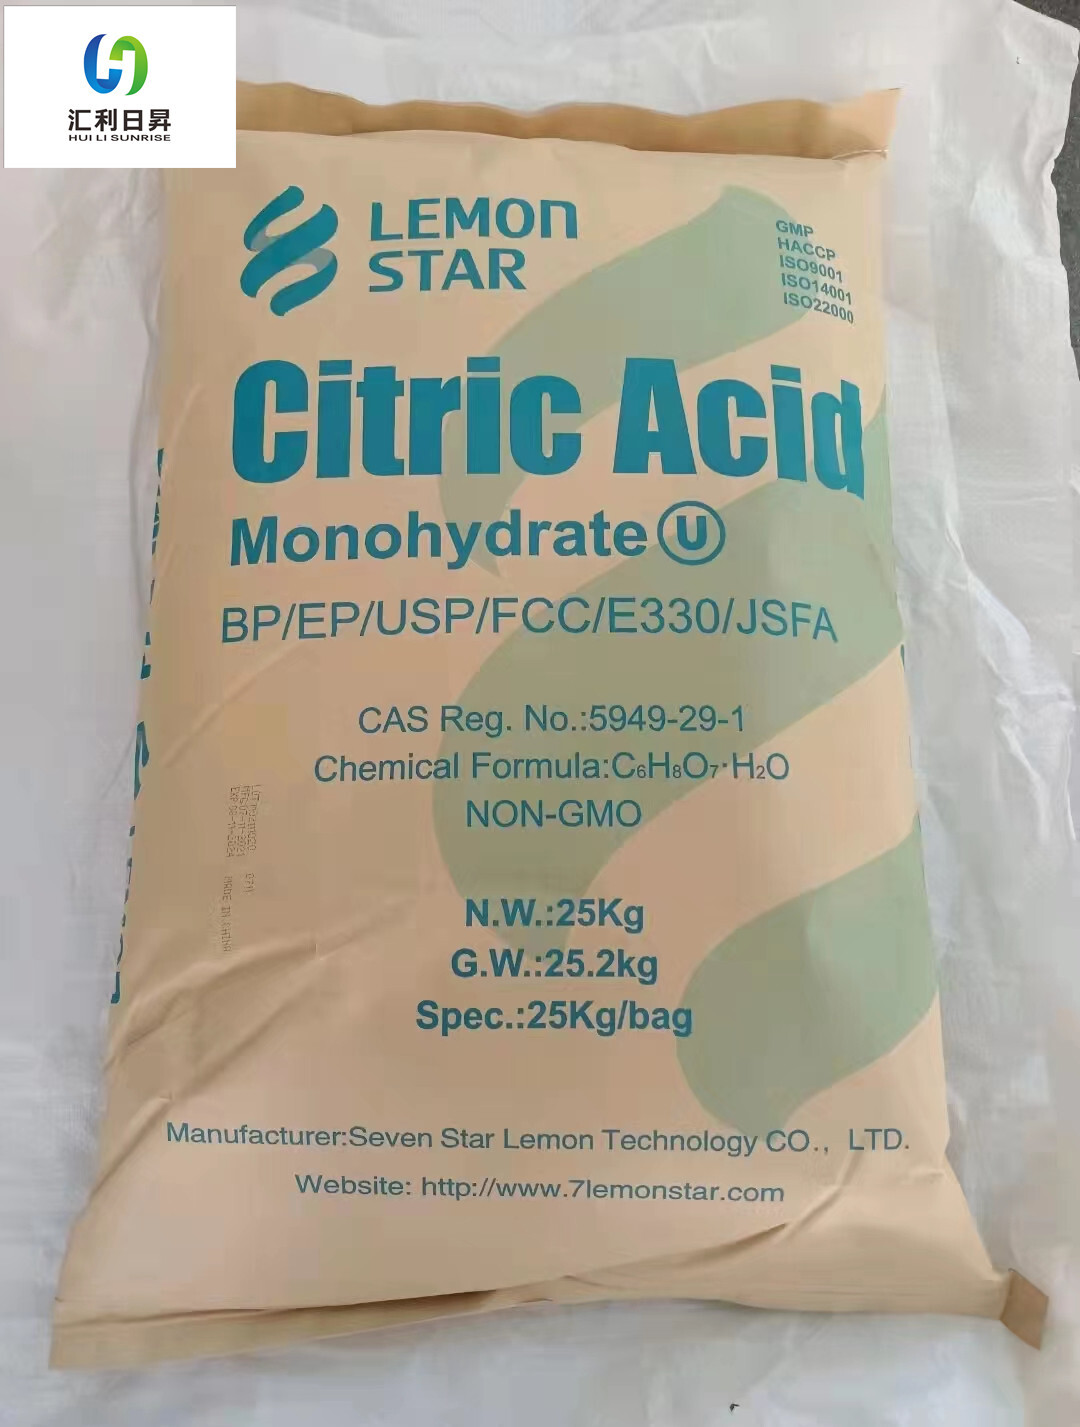 Anhydrous Citric Acid Ensign